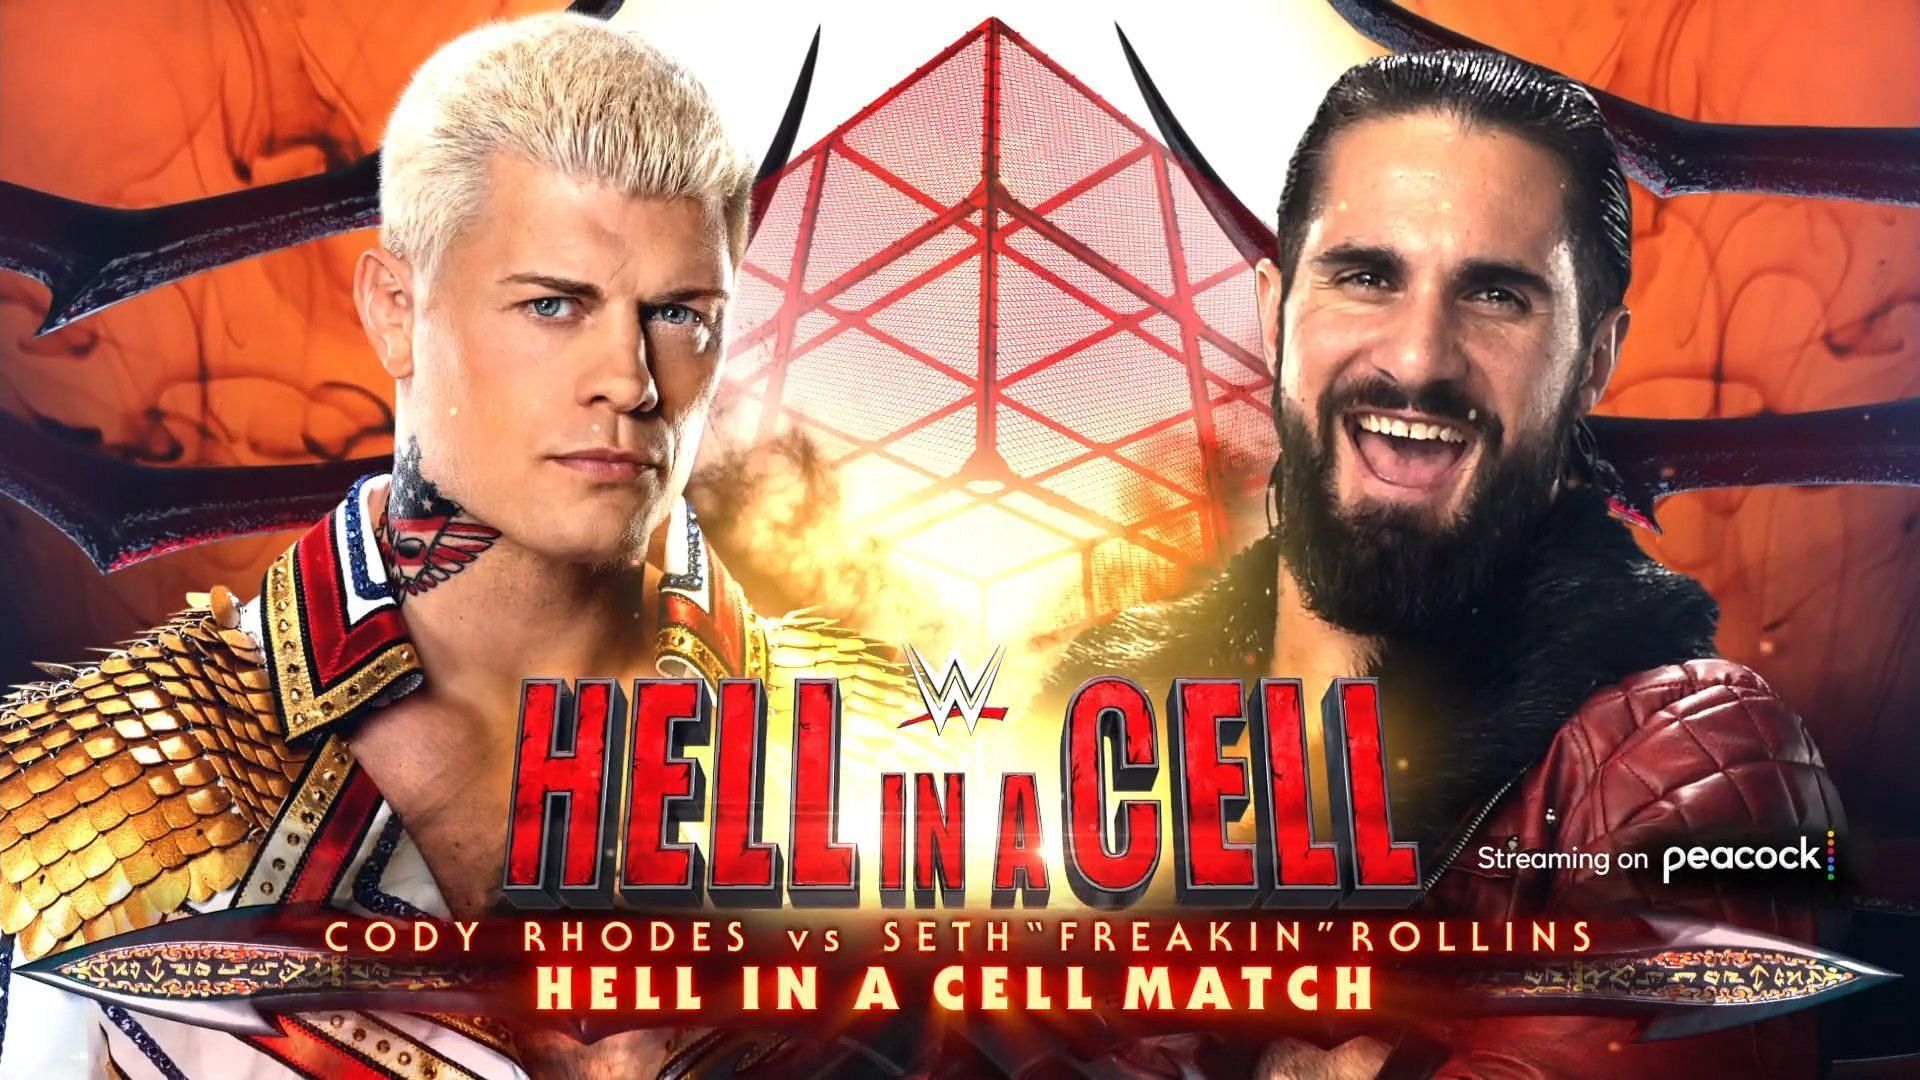 The match is set for the Hell in a Cell event